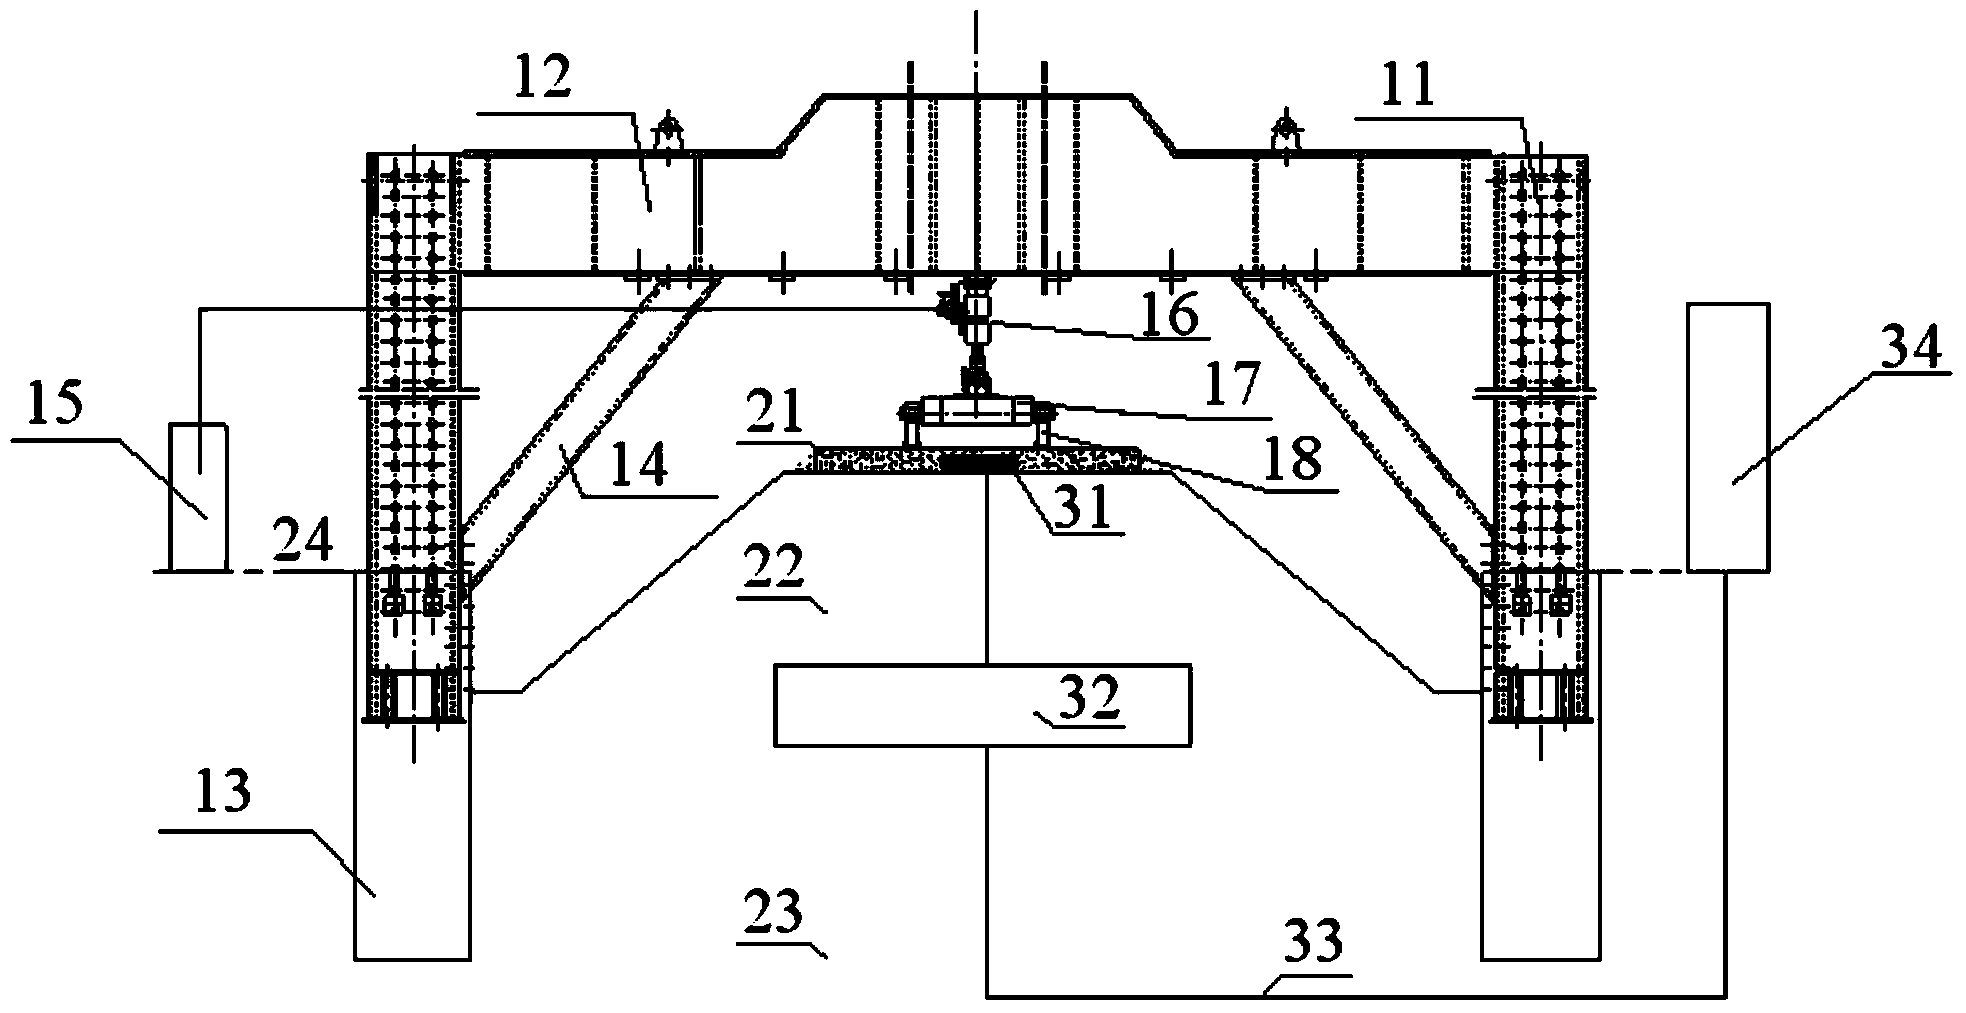 Simulated experiment device for dynamic damages of roadbeds and road surfaces under highway traffic loads